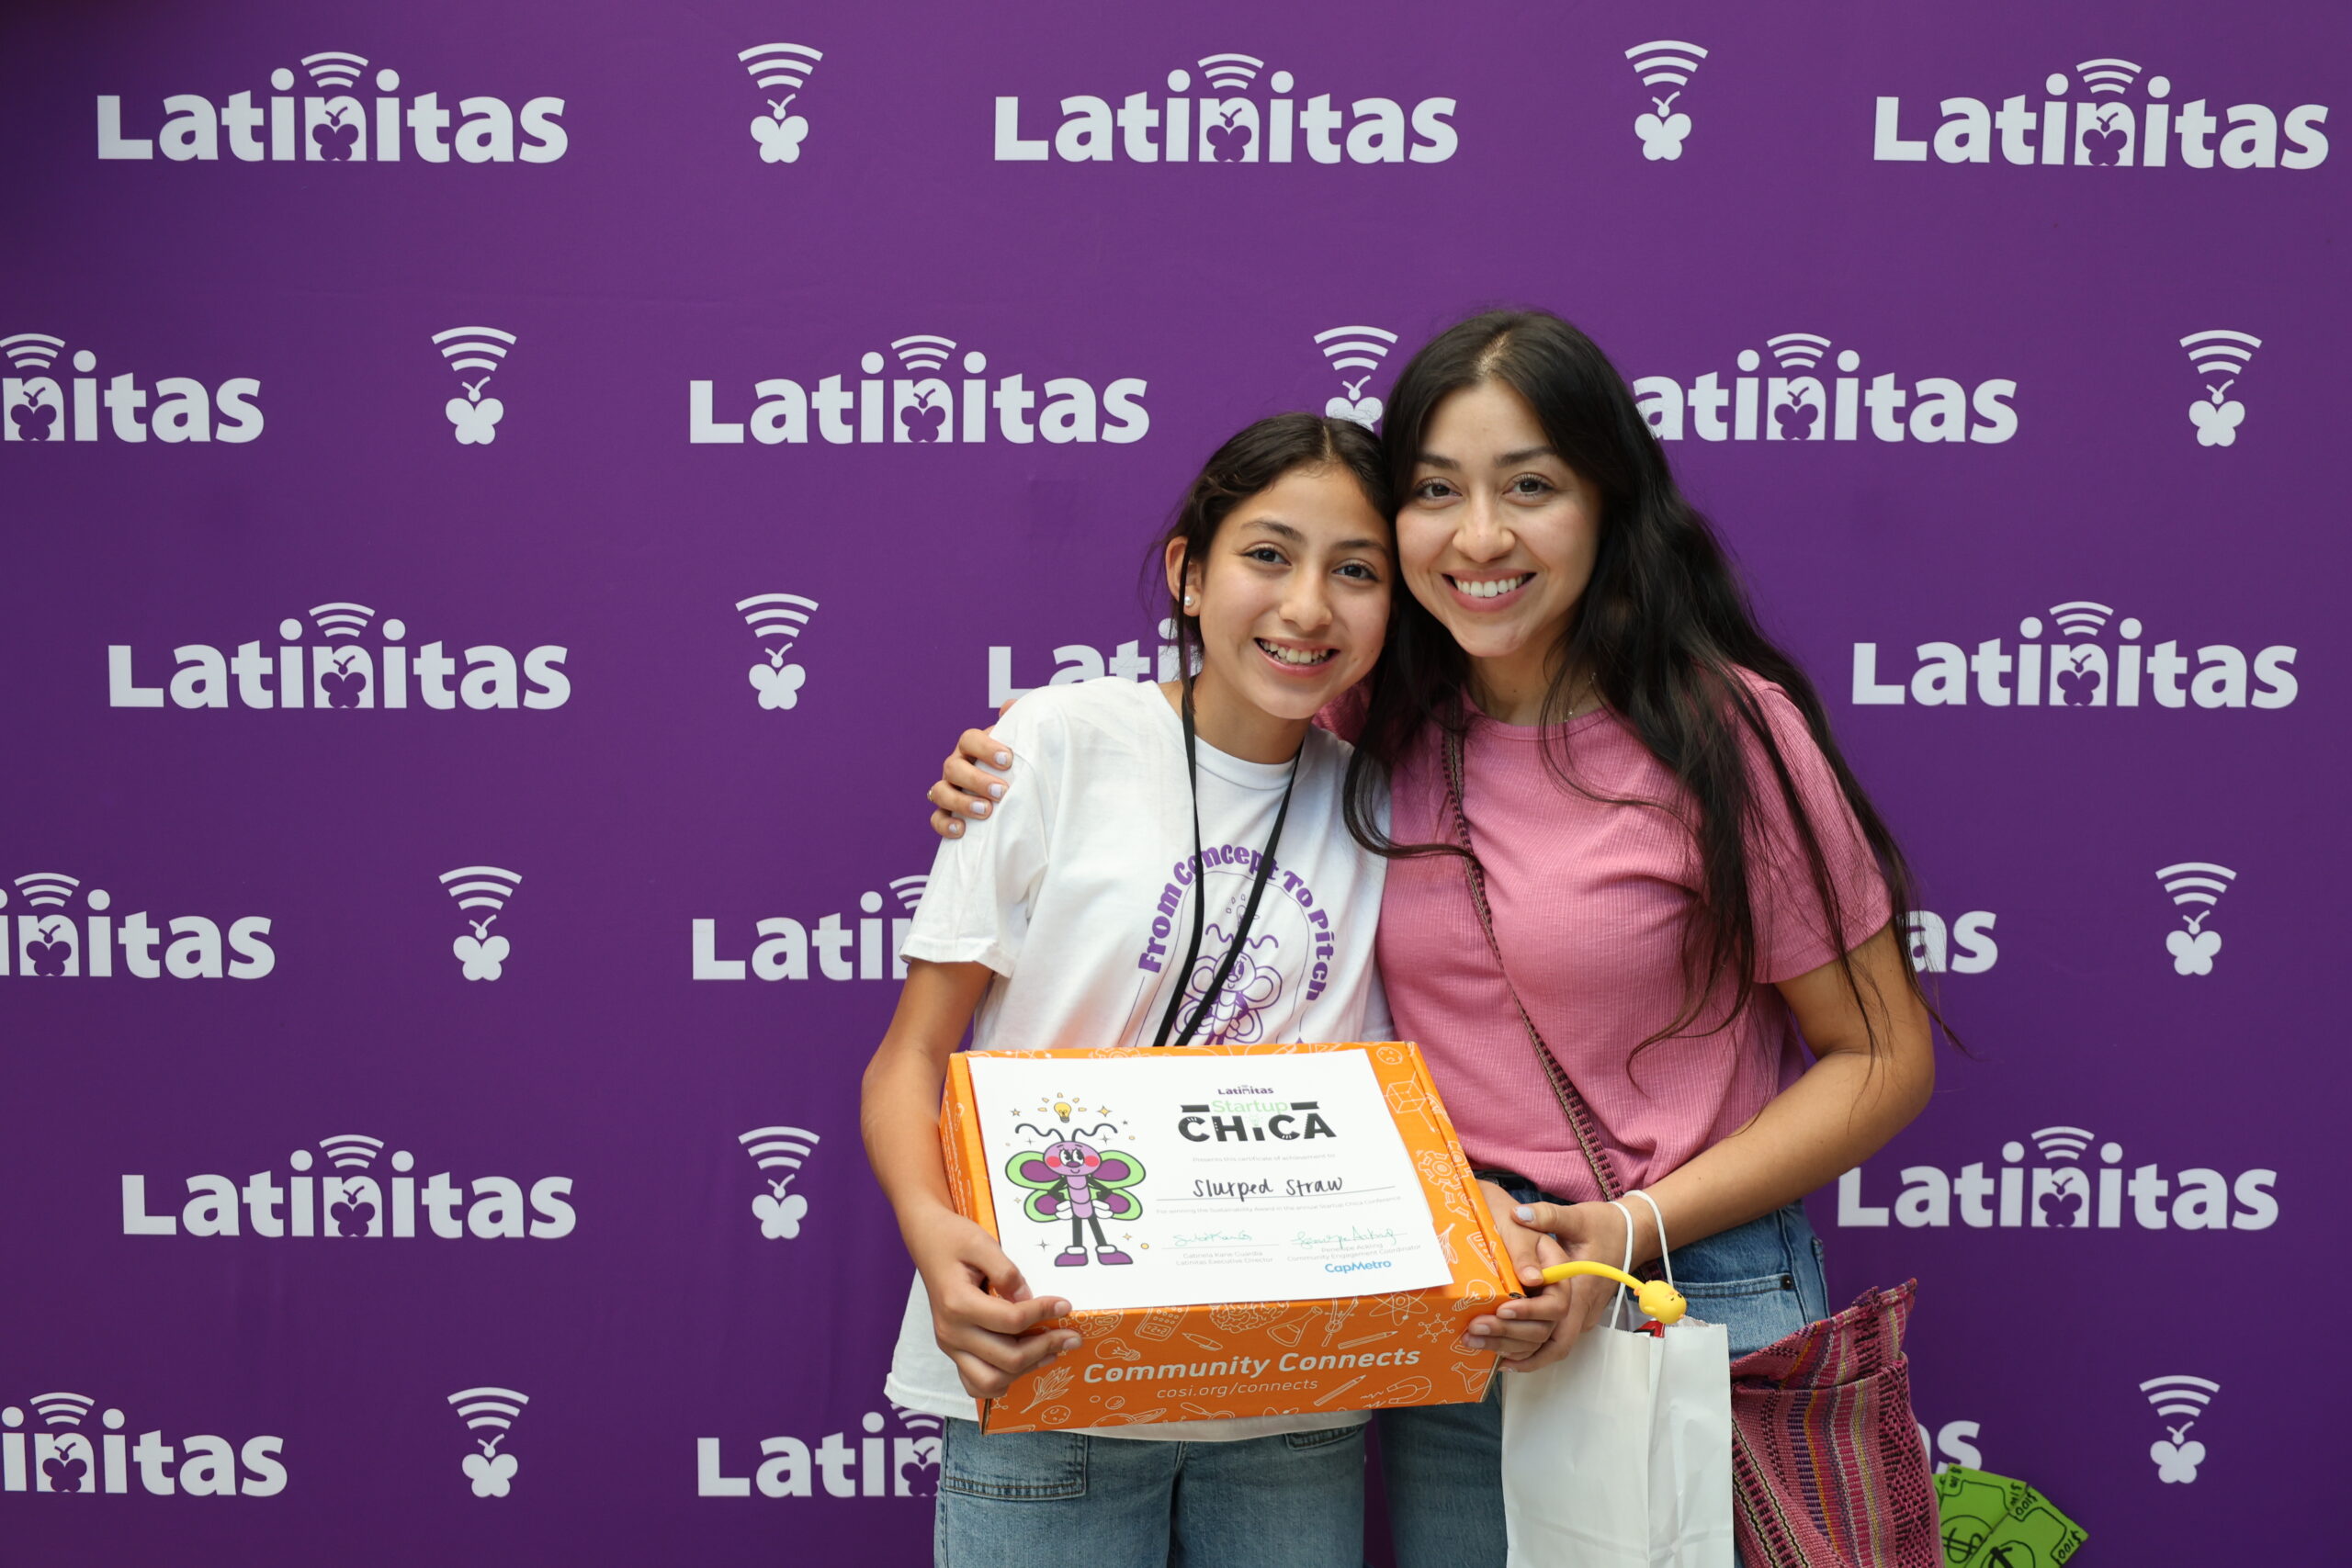 A Day At Startup Chica: Latinitas Entrepreneurial Conference